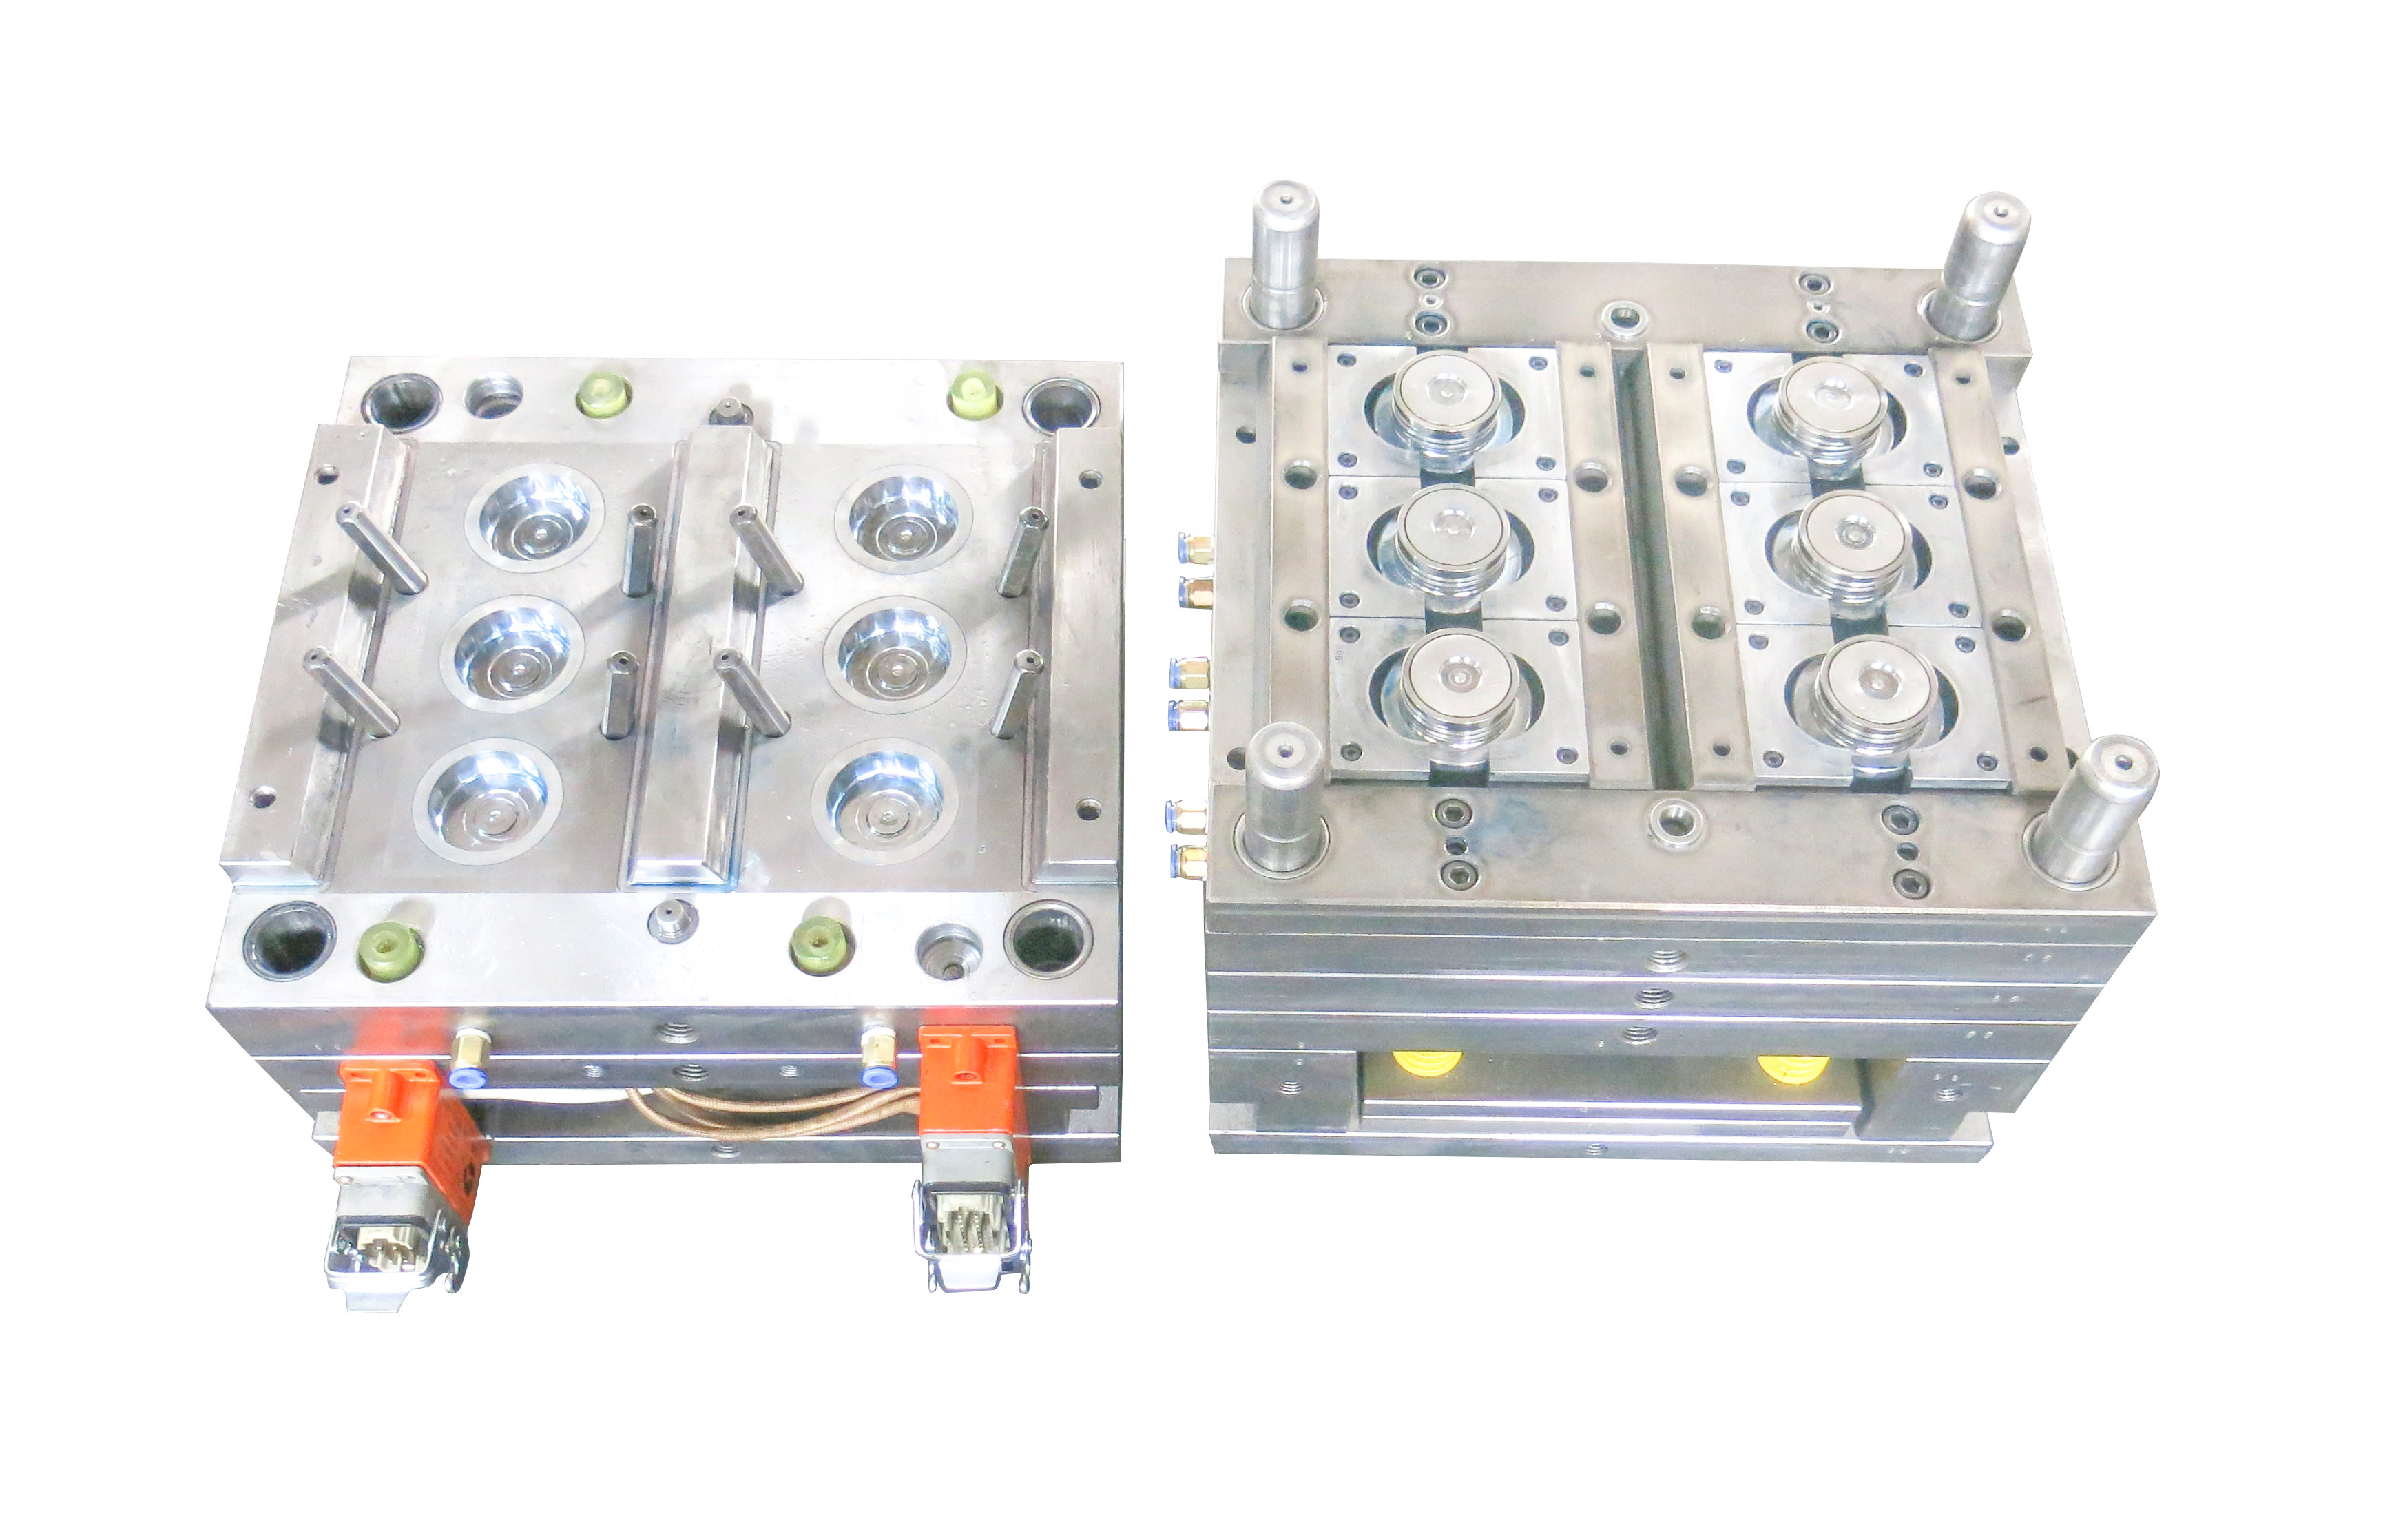 Problems easily encountered in plastic molding mold processing